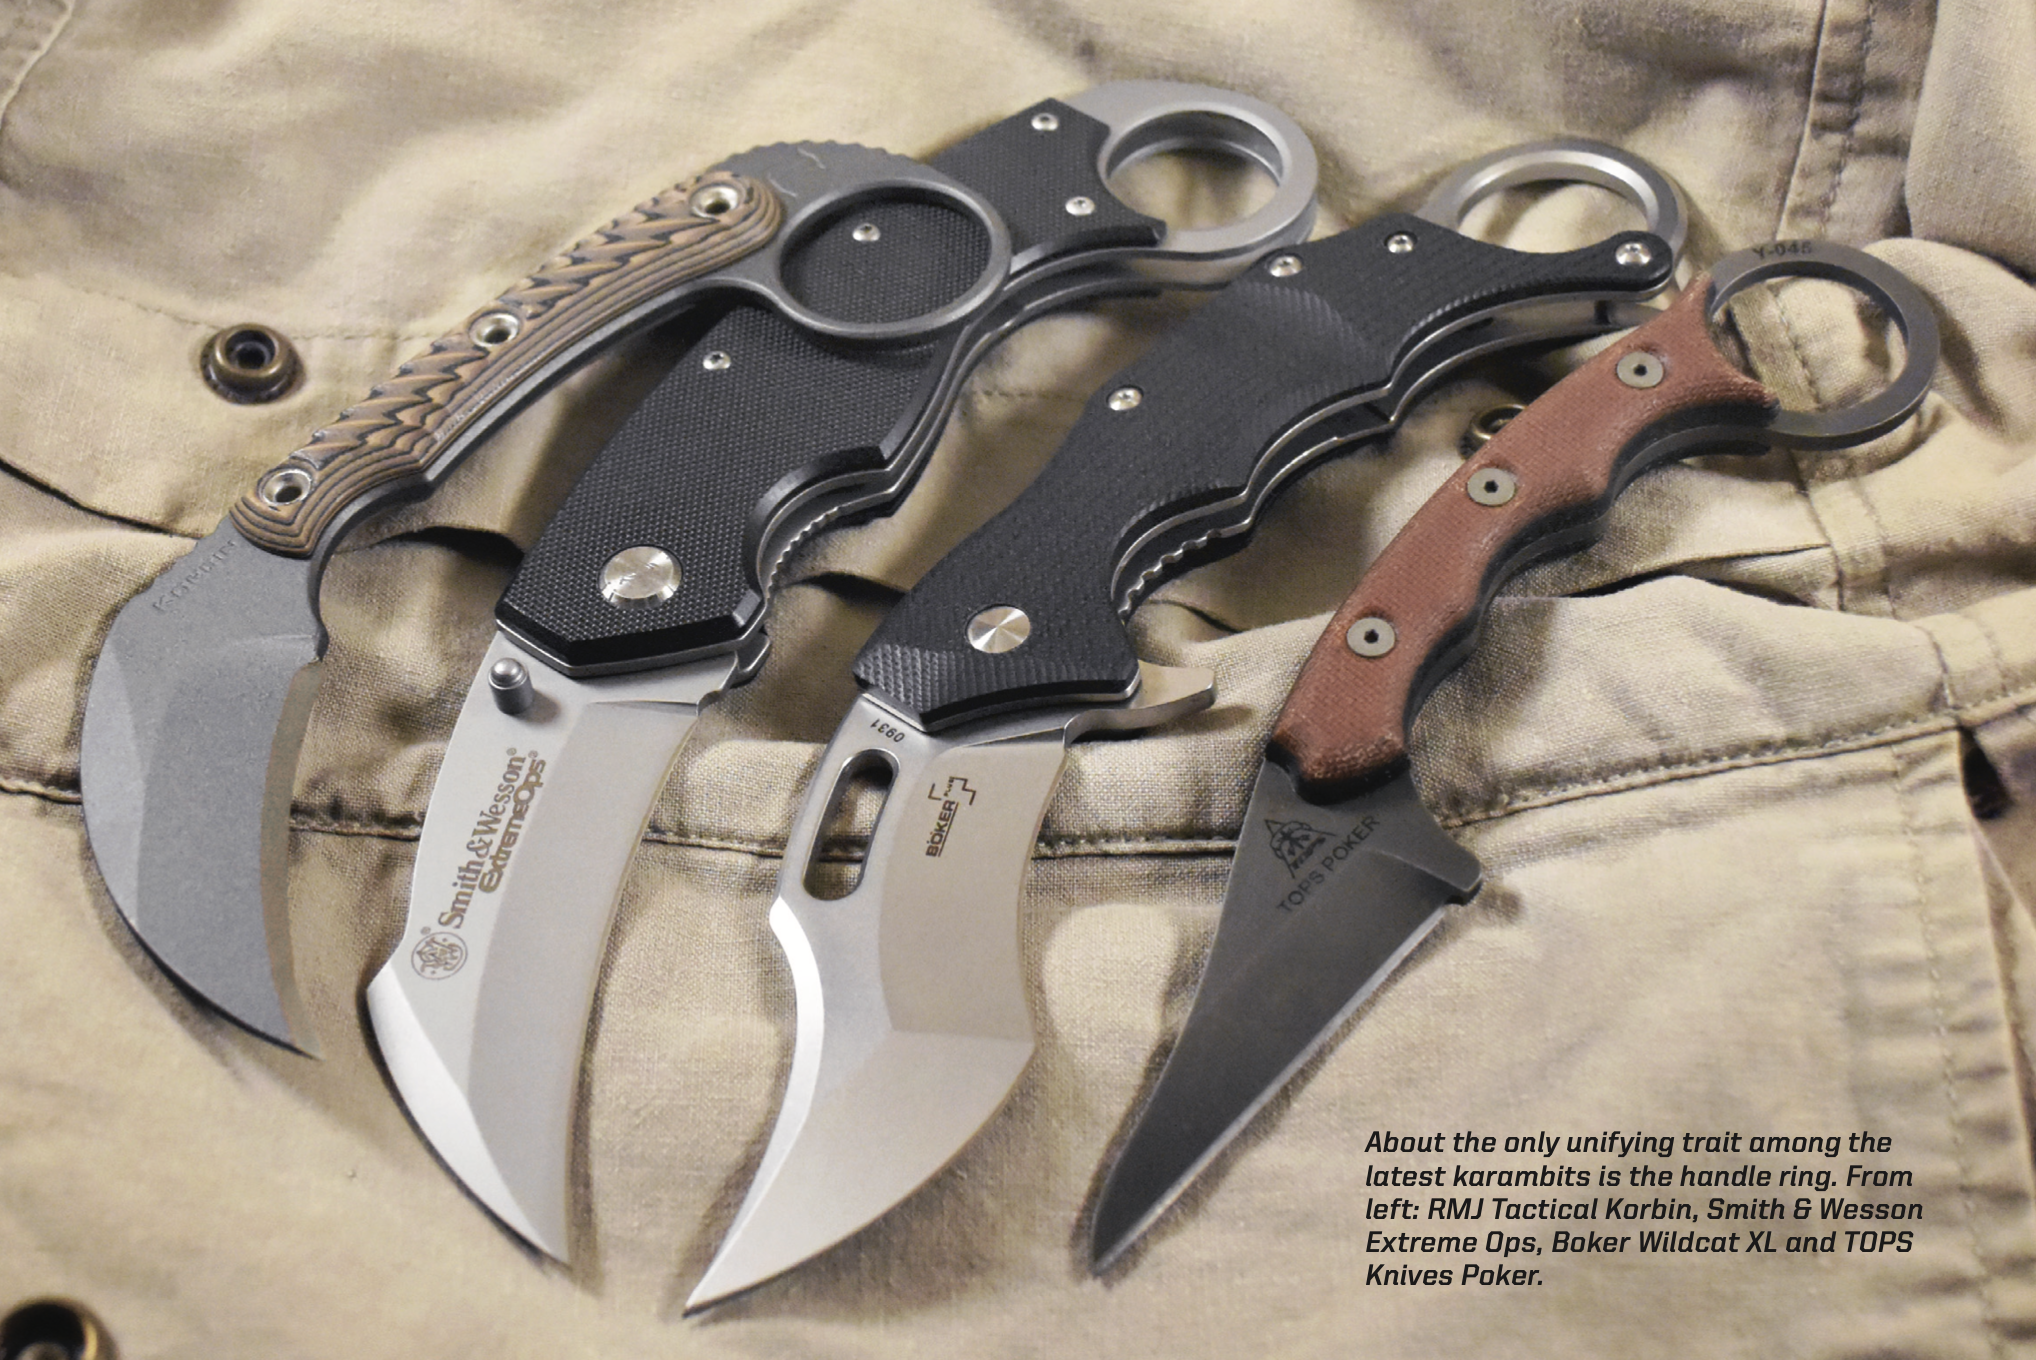 you guys know of any HIGH quality karambits in this style? The